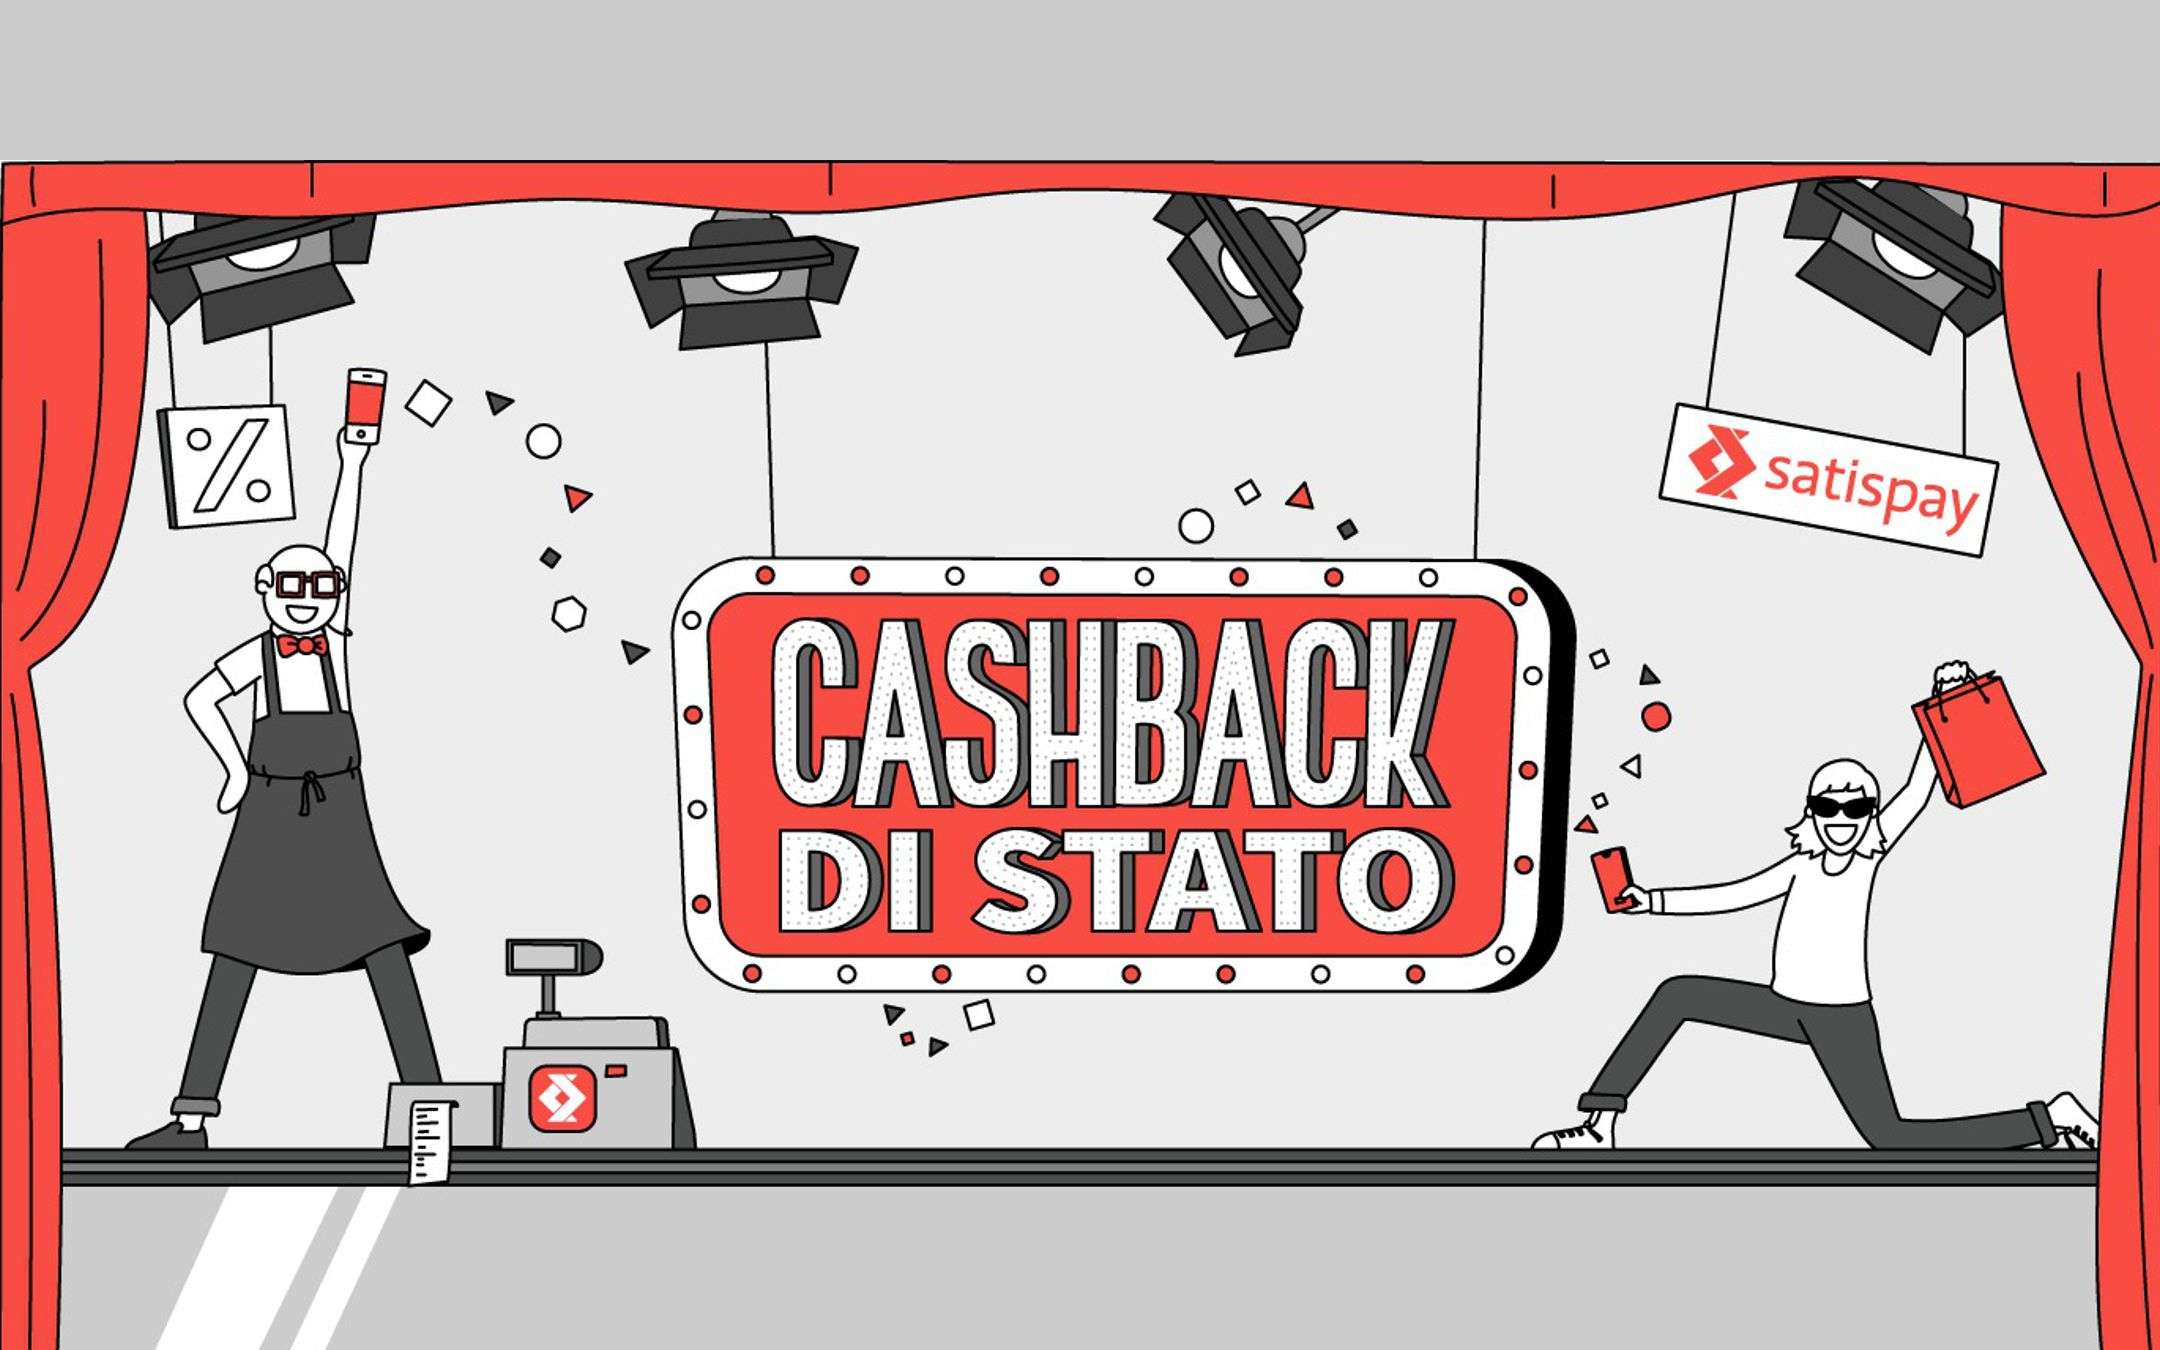 Cashback without IO and SPID? Yes, thanks to Satispay